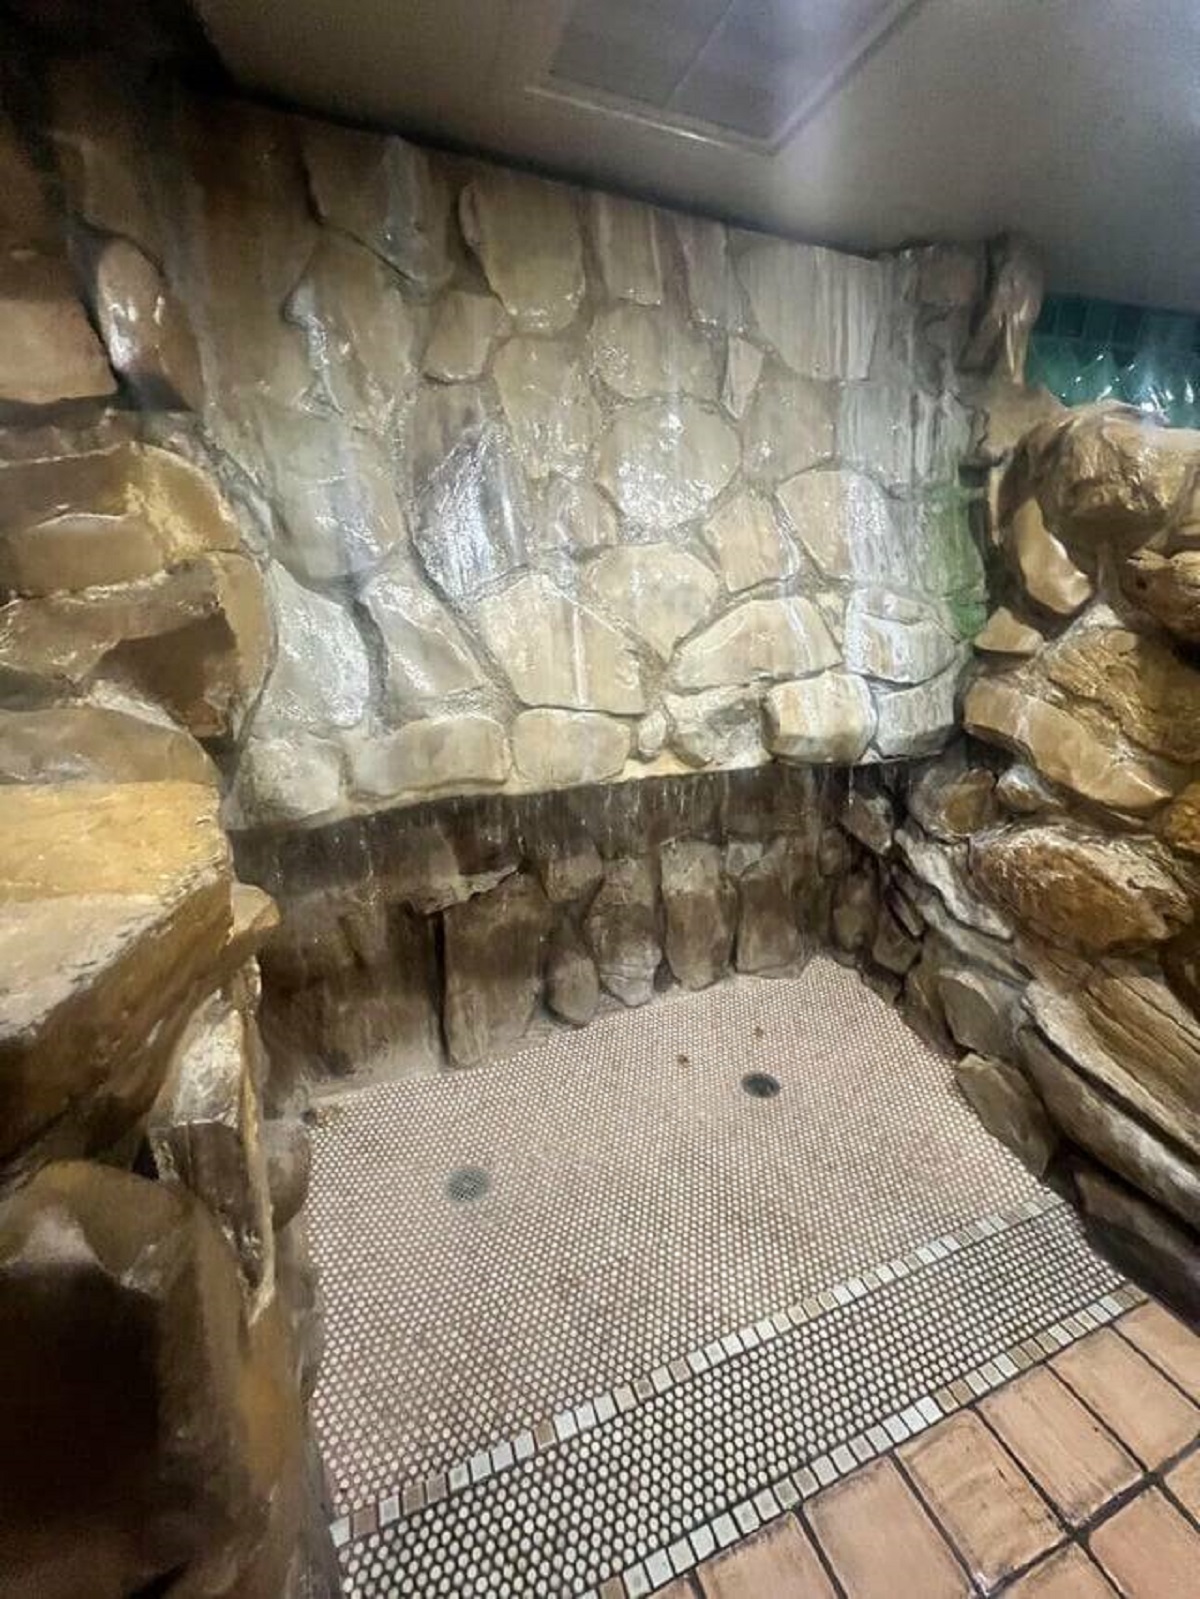 "The Men’s urinal at The Madonna Inn. A sensor triggers when you start peeing and water falls along the wall and flushes down the drain"